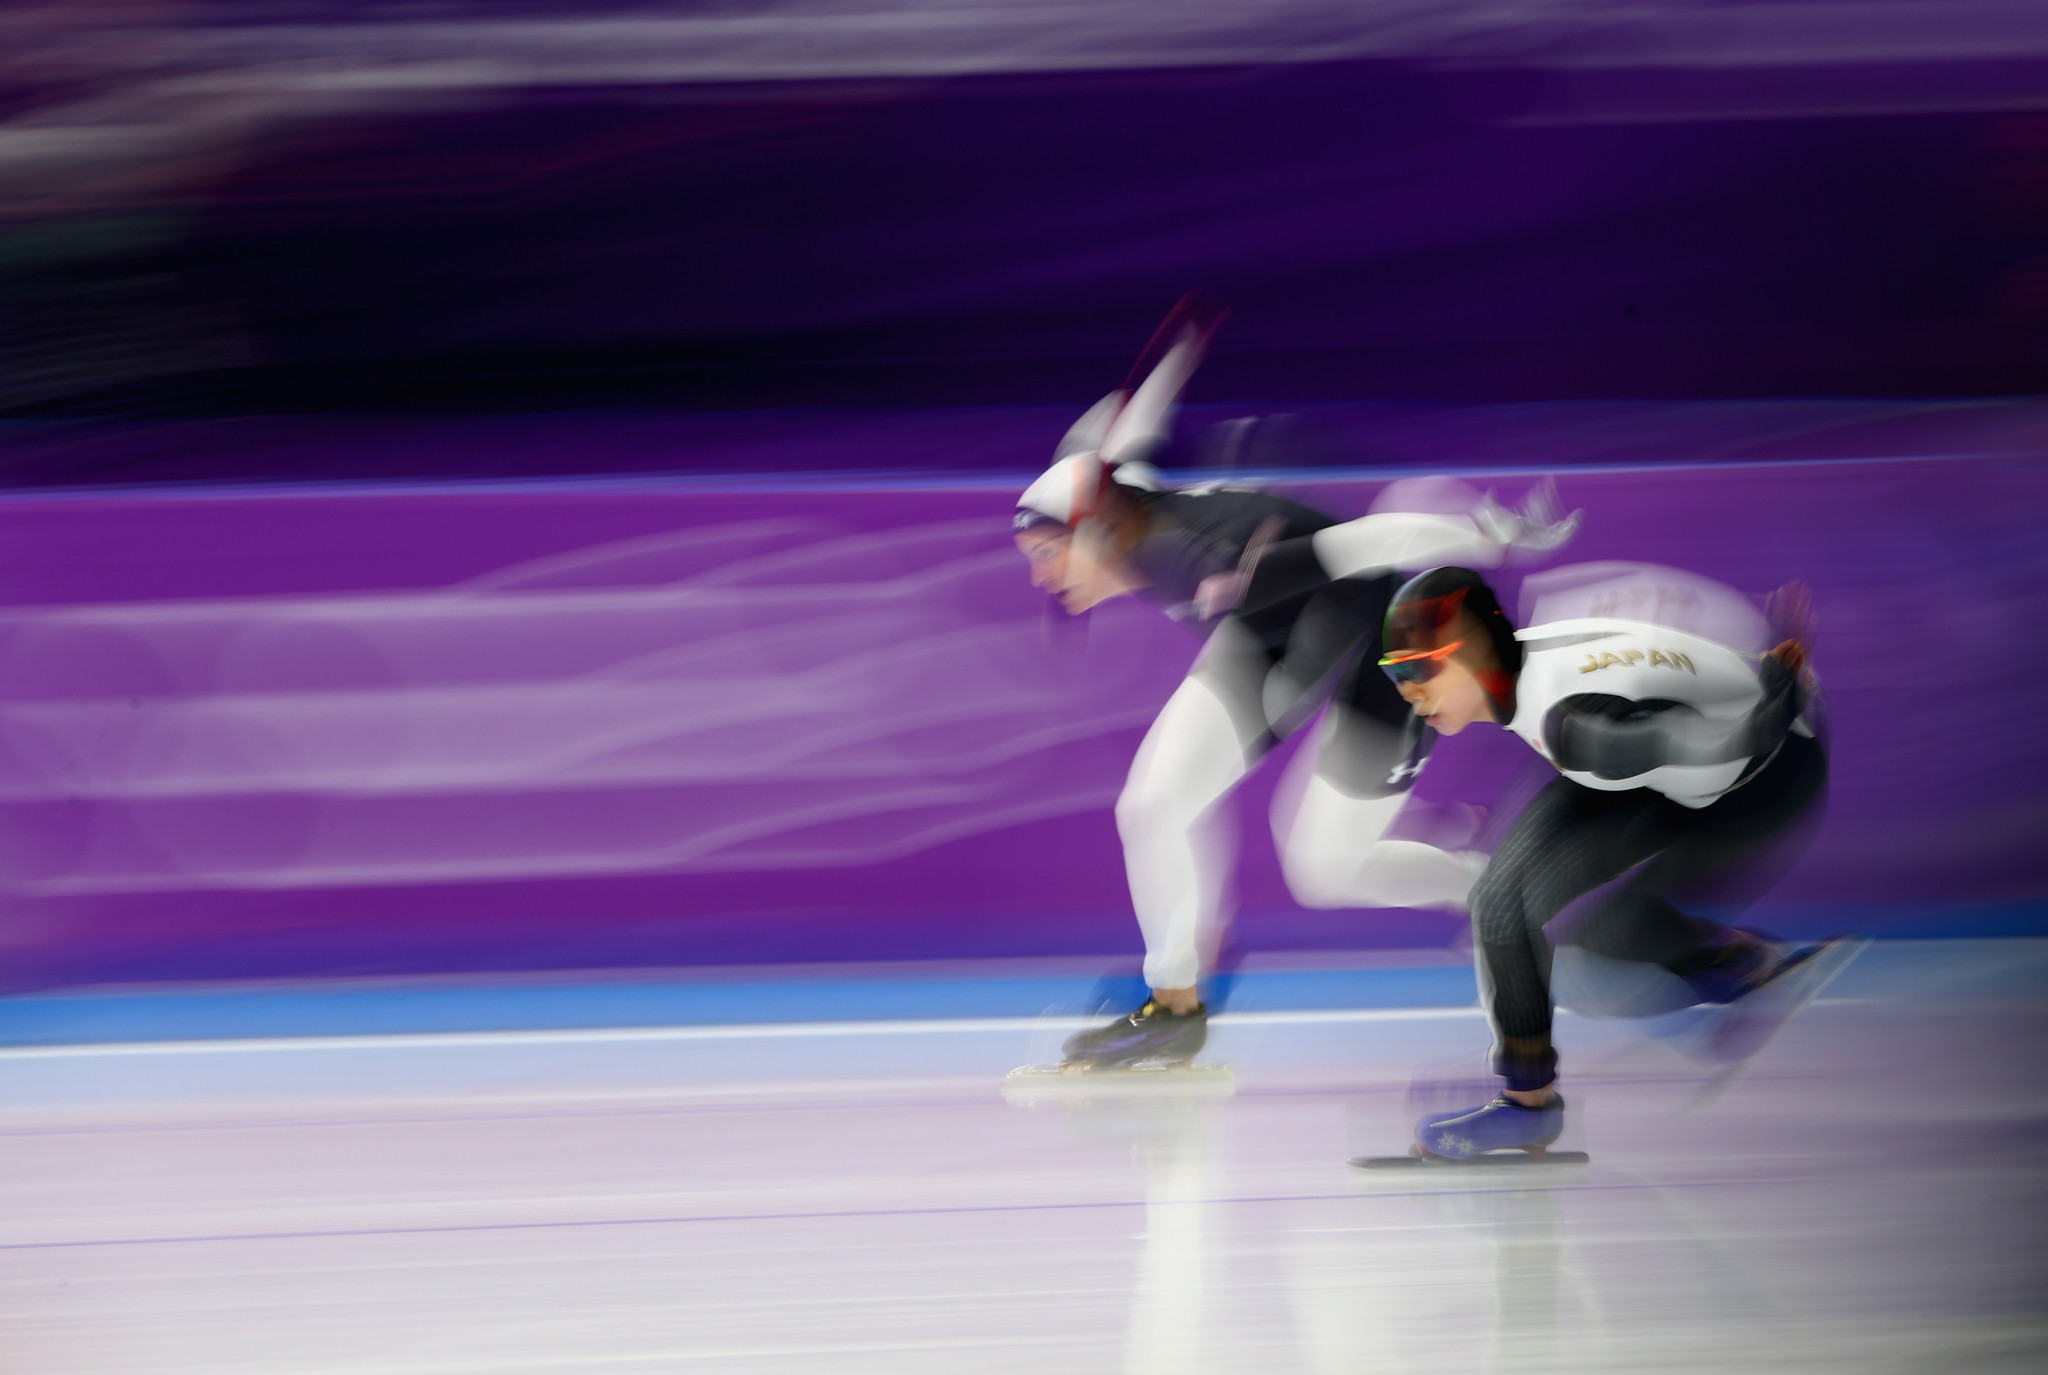 Japan's preparations for the new ISU Speed Skating World Cup have been hit by an outbreak of COVID-19 at a training camp in Germany ©Getty Images